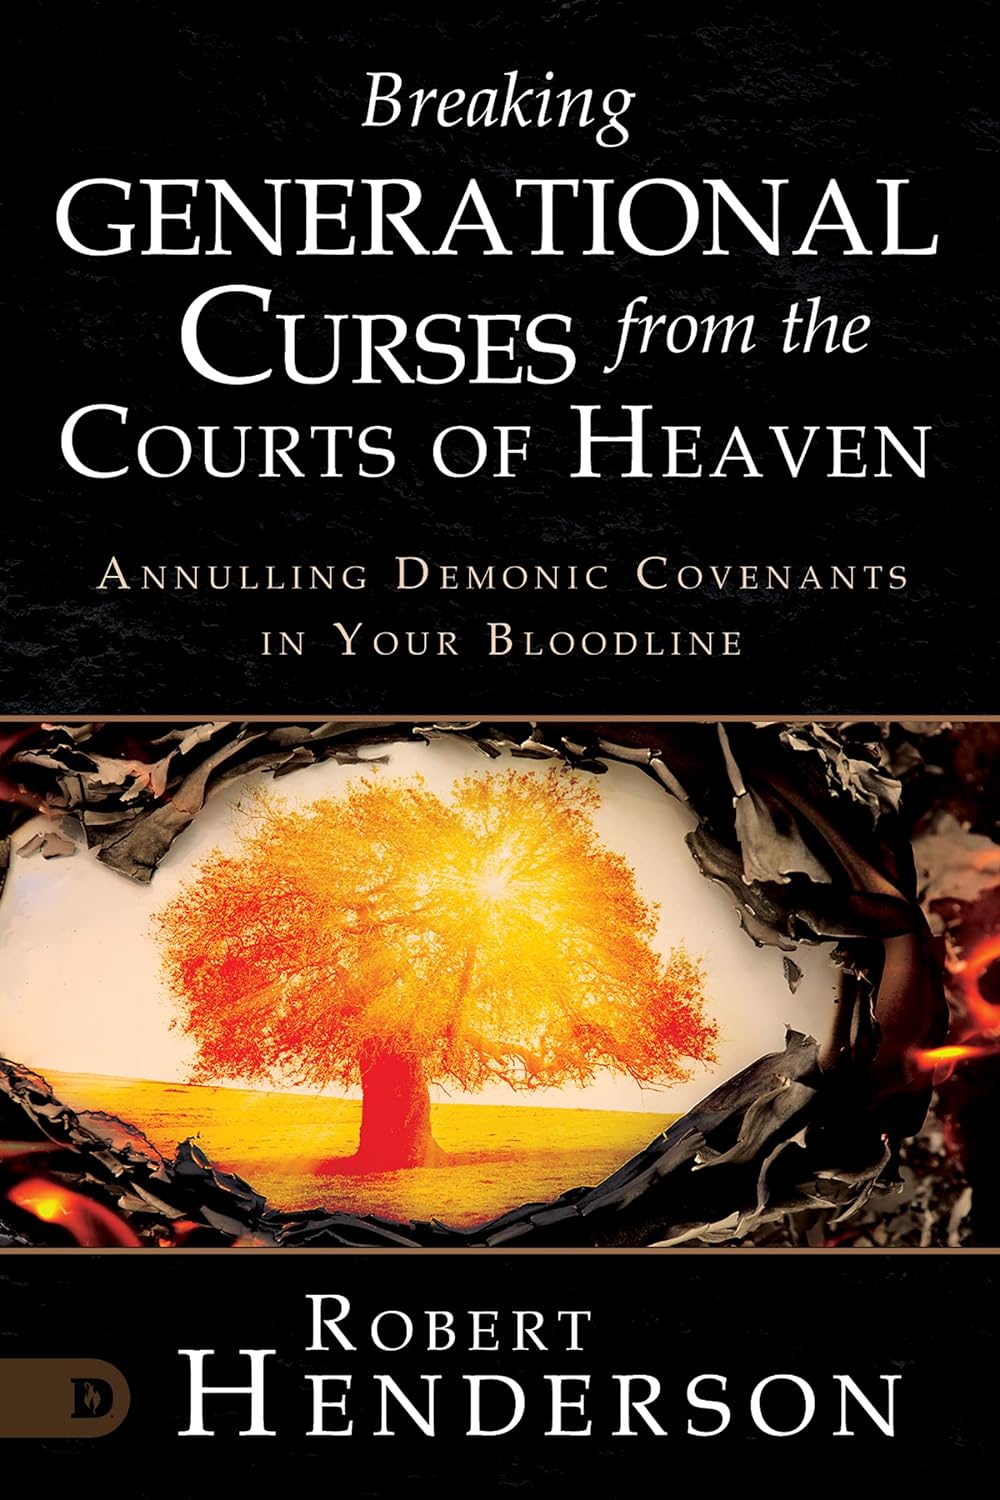 Breaking Generational Curses from the Courts of Heaven - Robert Henderson